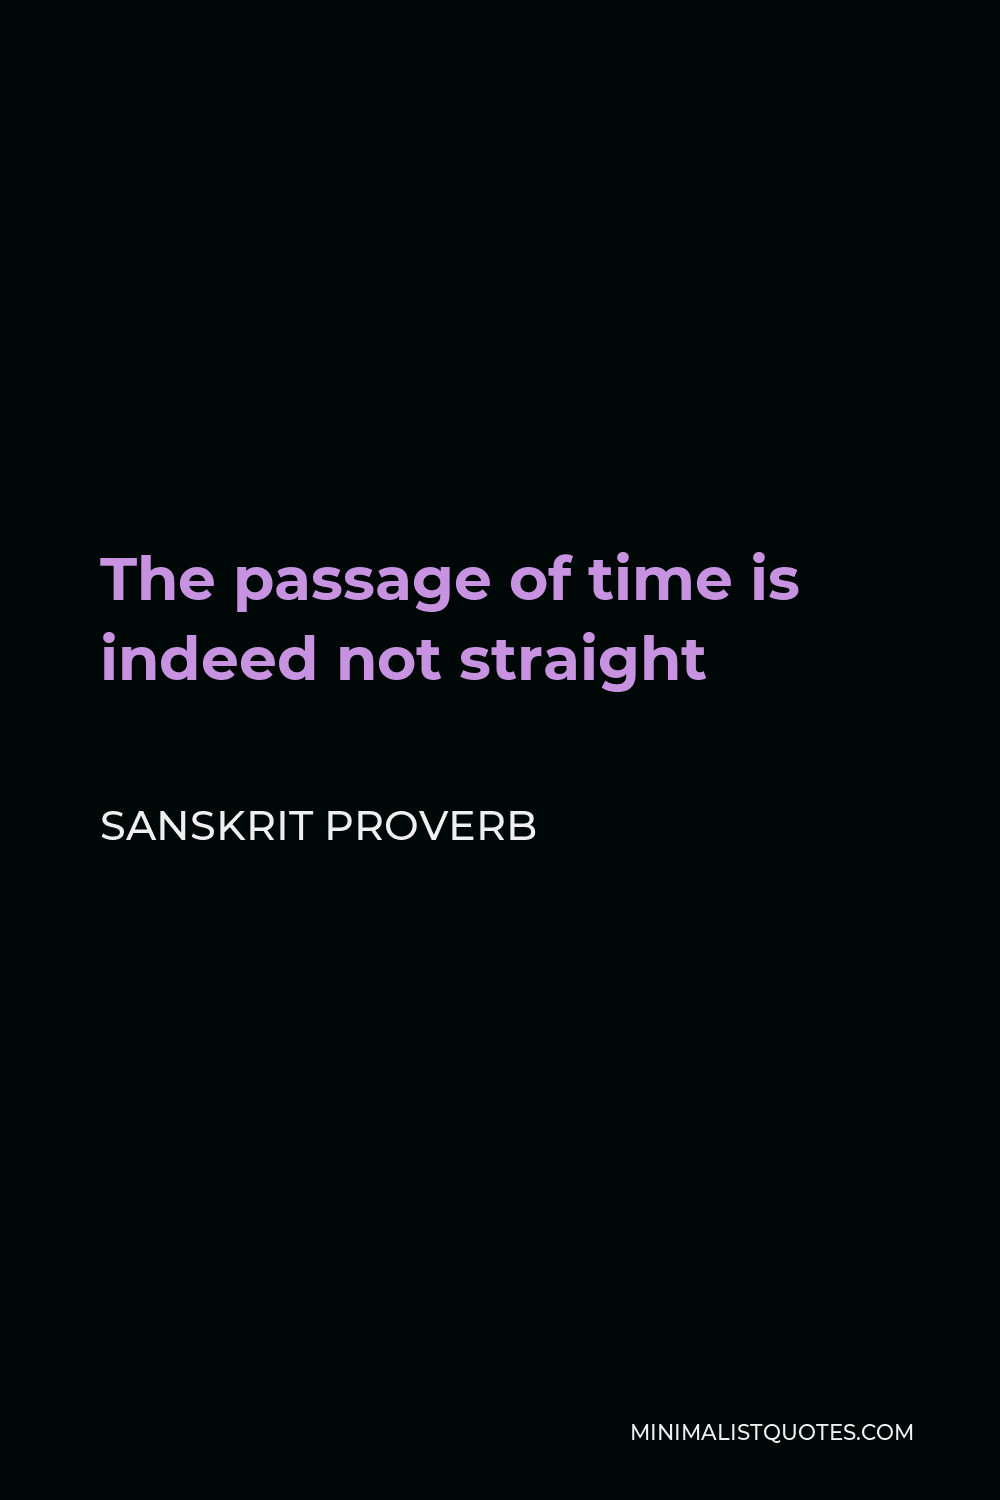 Sanskrit Proverb Quote - The passage of time is indeed not straight